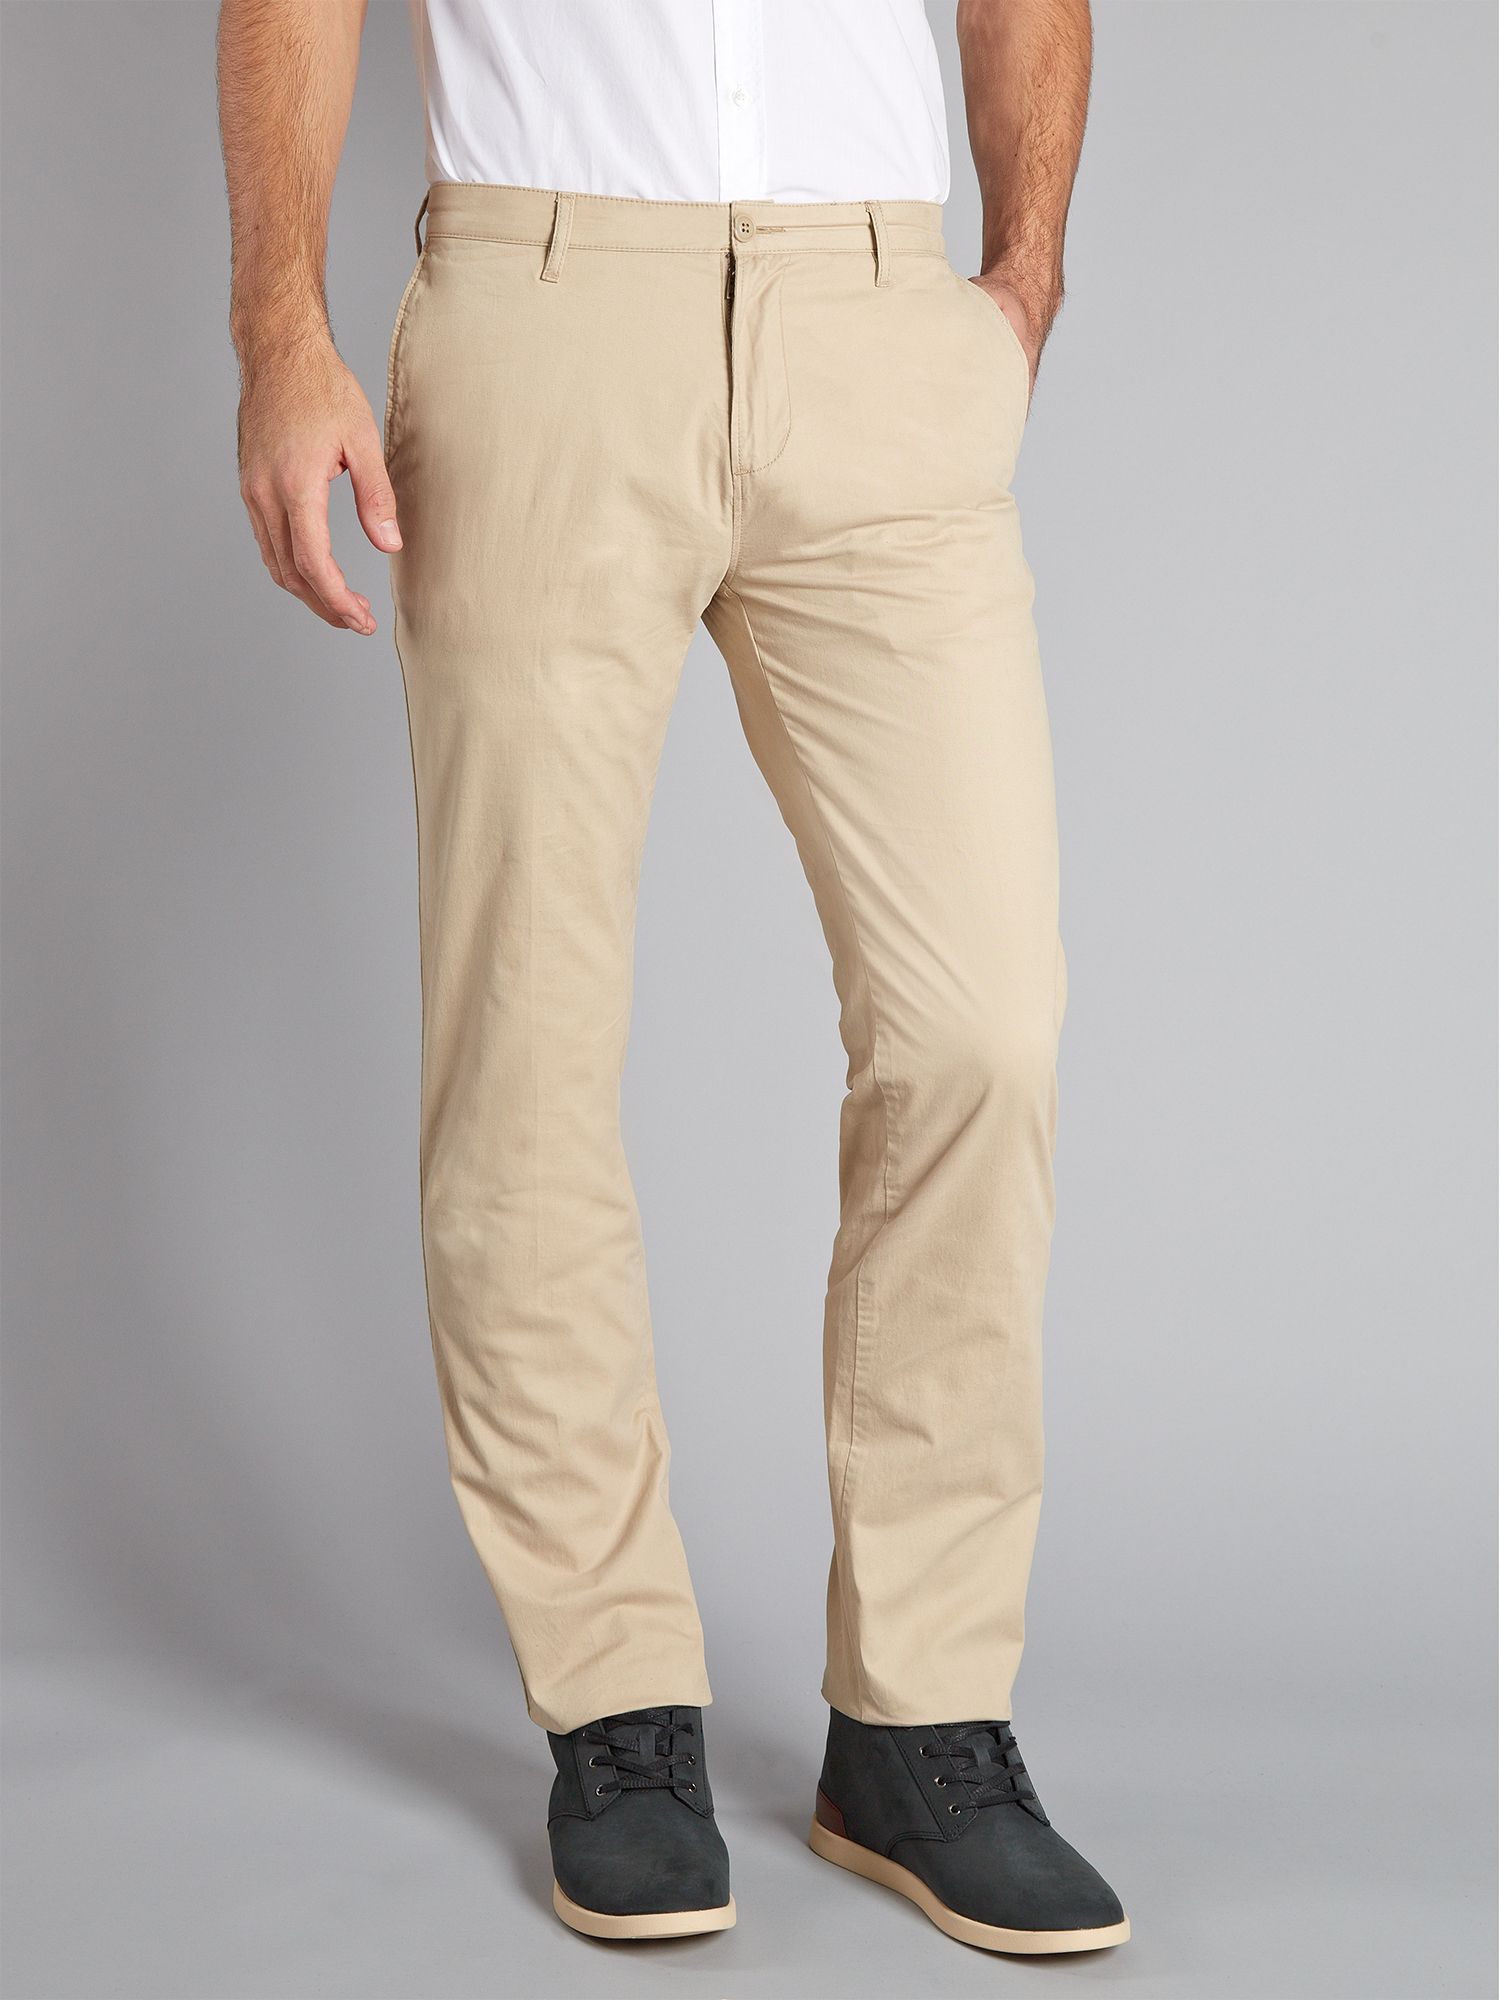 Lacoste Slim Fit Cotton Trousers in Natural for Men | Lyst